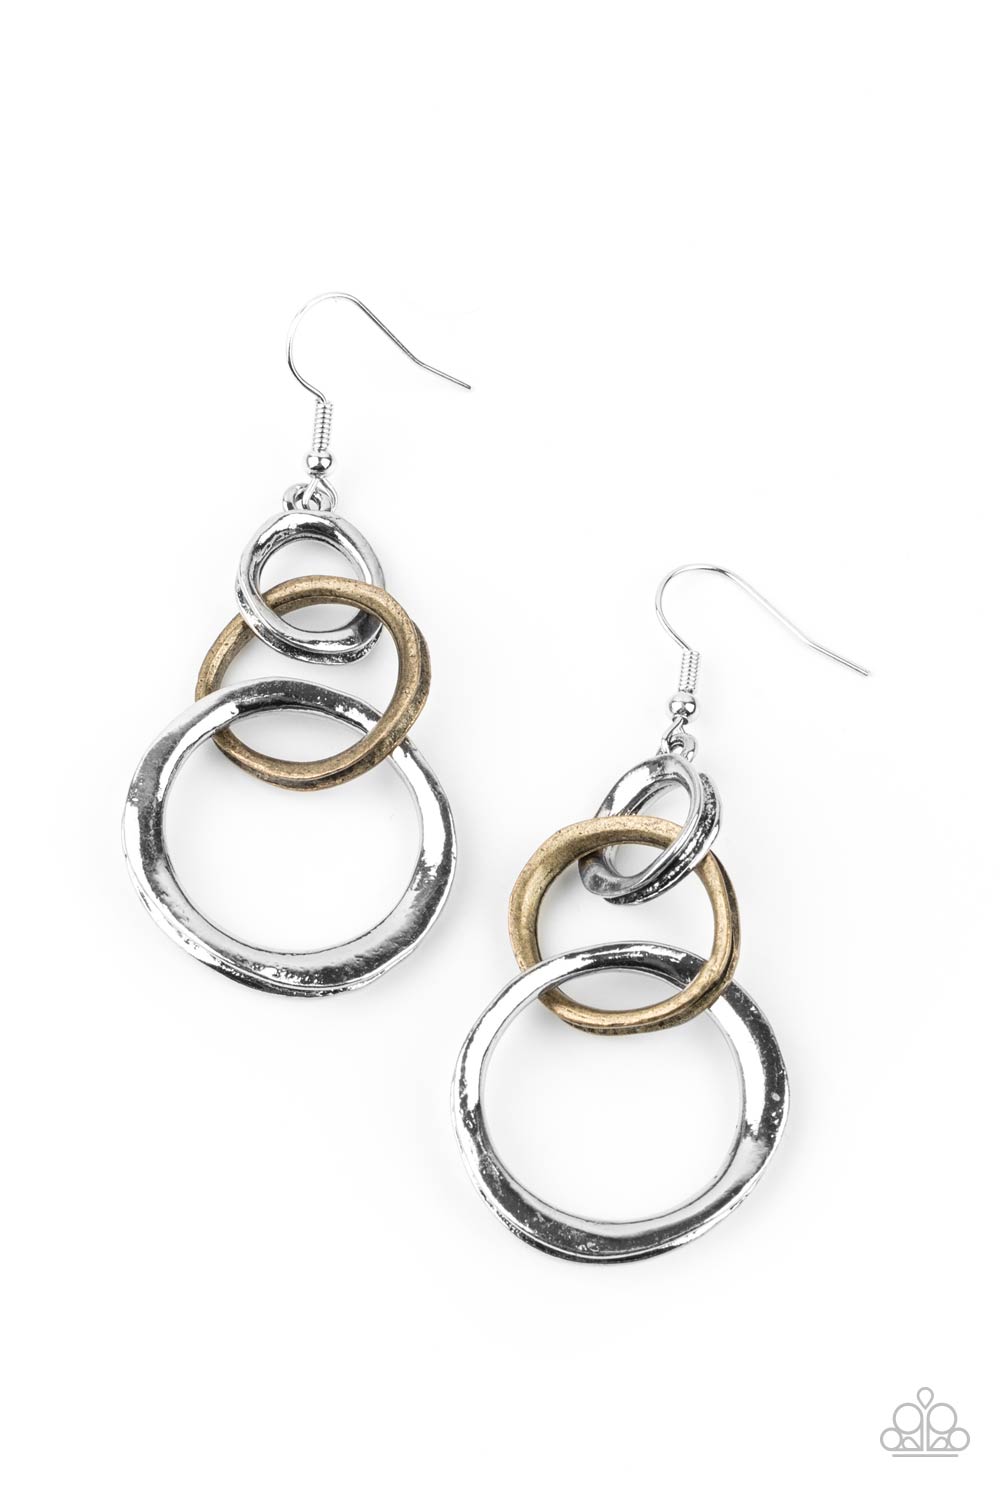 Paparazzi Accessories Harmoniously Handcrafted - Silver Fishhook Earrings